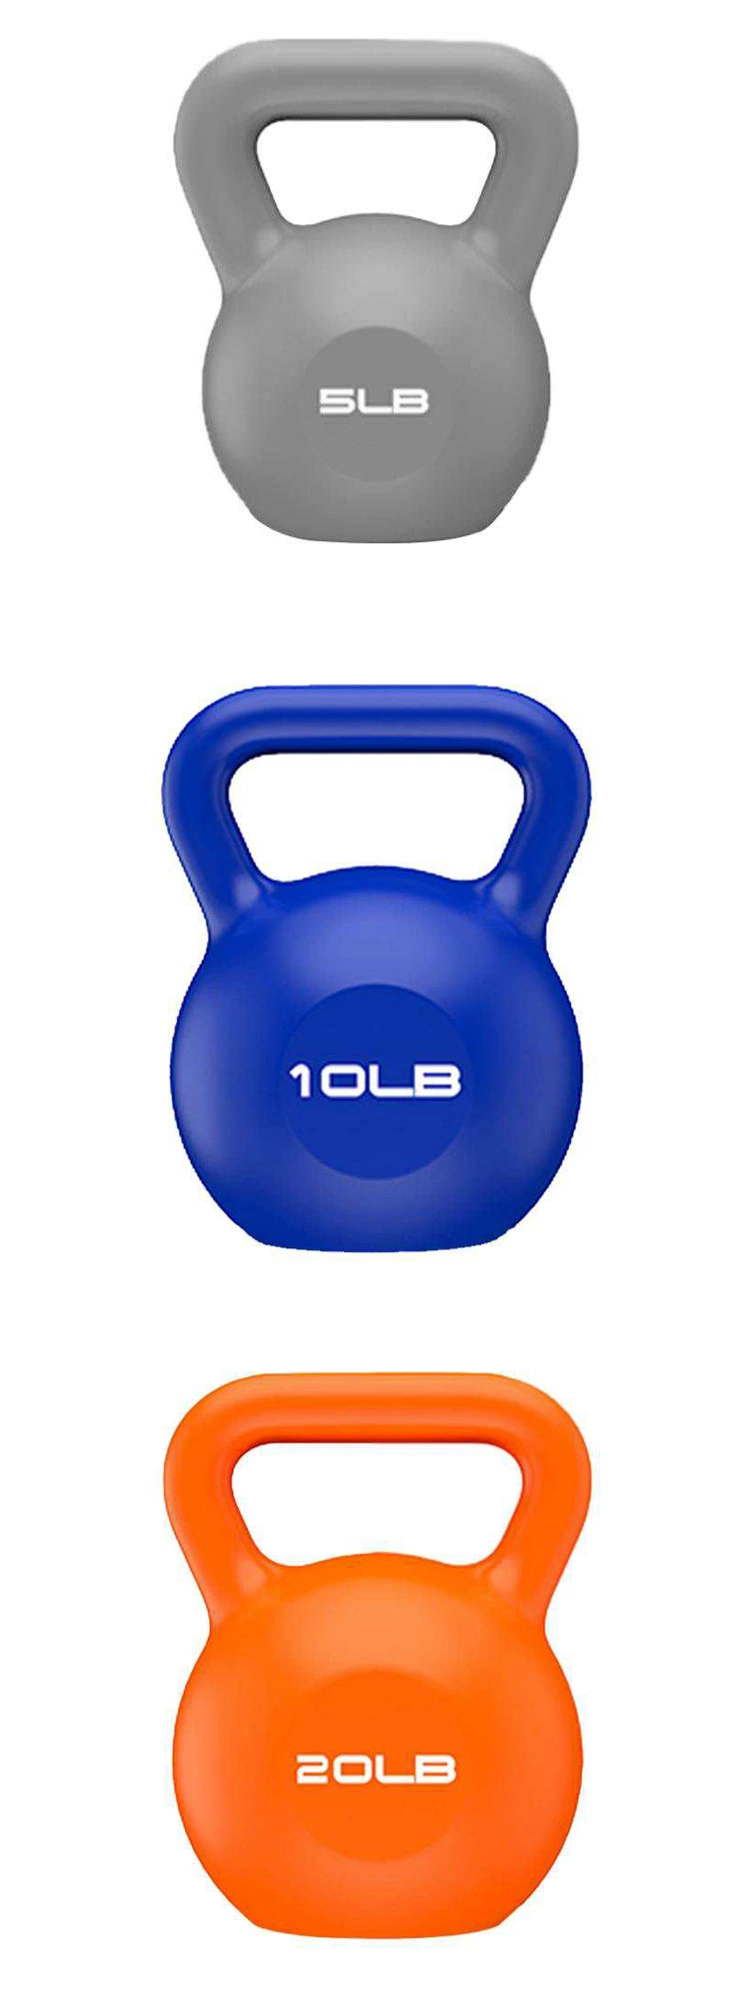 Gym Fitness Accessories Bodybuilding Cheap Rubber Coated Cement Kettlebells